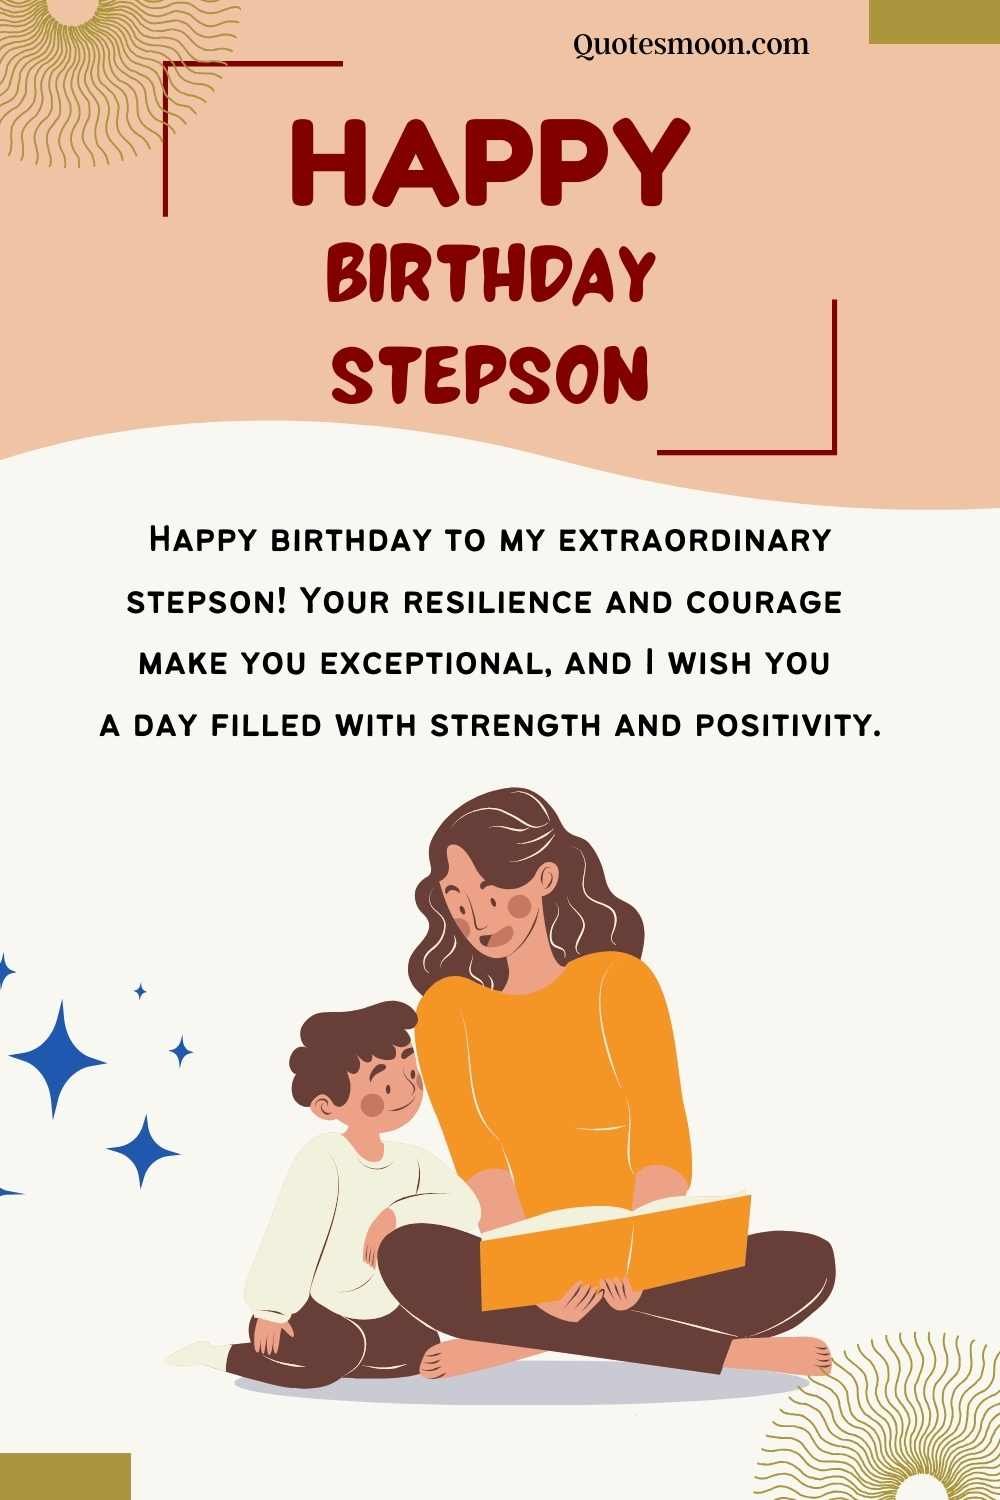 Happy Birthday Step Son Messages and Wishes